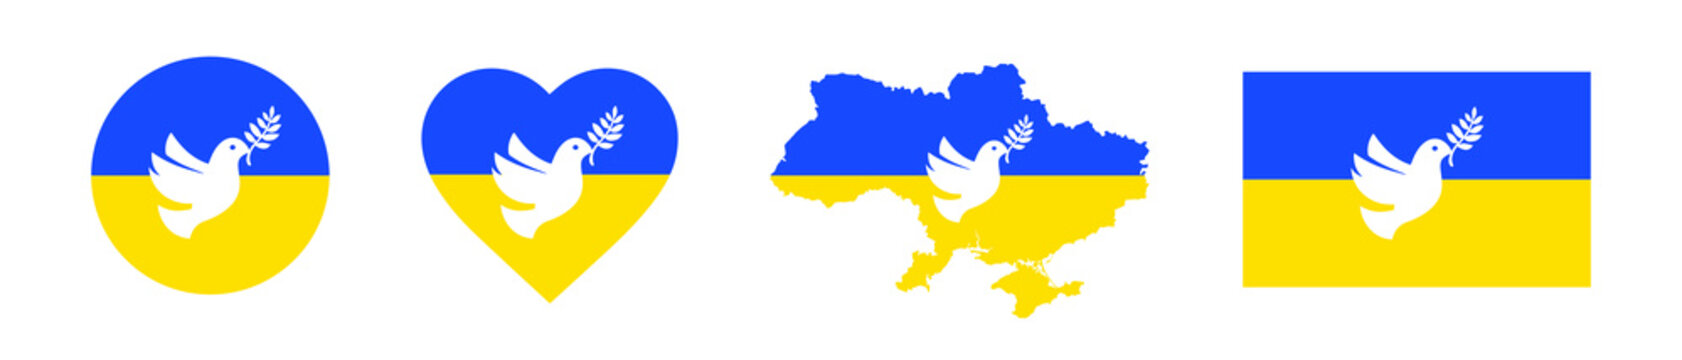 Wall Mural -  - Stop war in Ukraine. Heart-shaped icon with Ukrainian flag. Borders of Ukraine with Ukraine flag. International protest. Flying peace dove with olive branch symbol. White pigeon. No war.